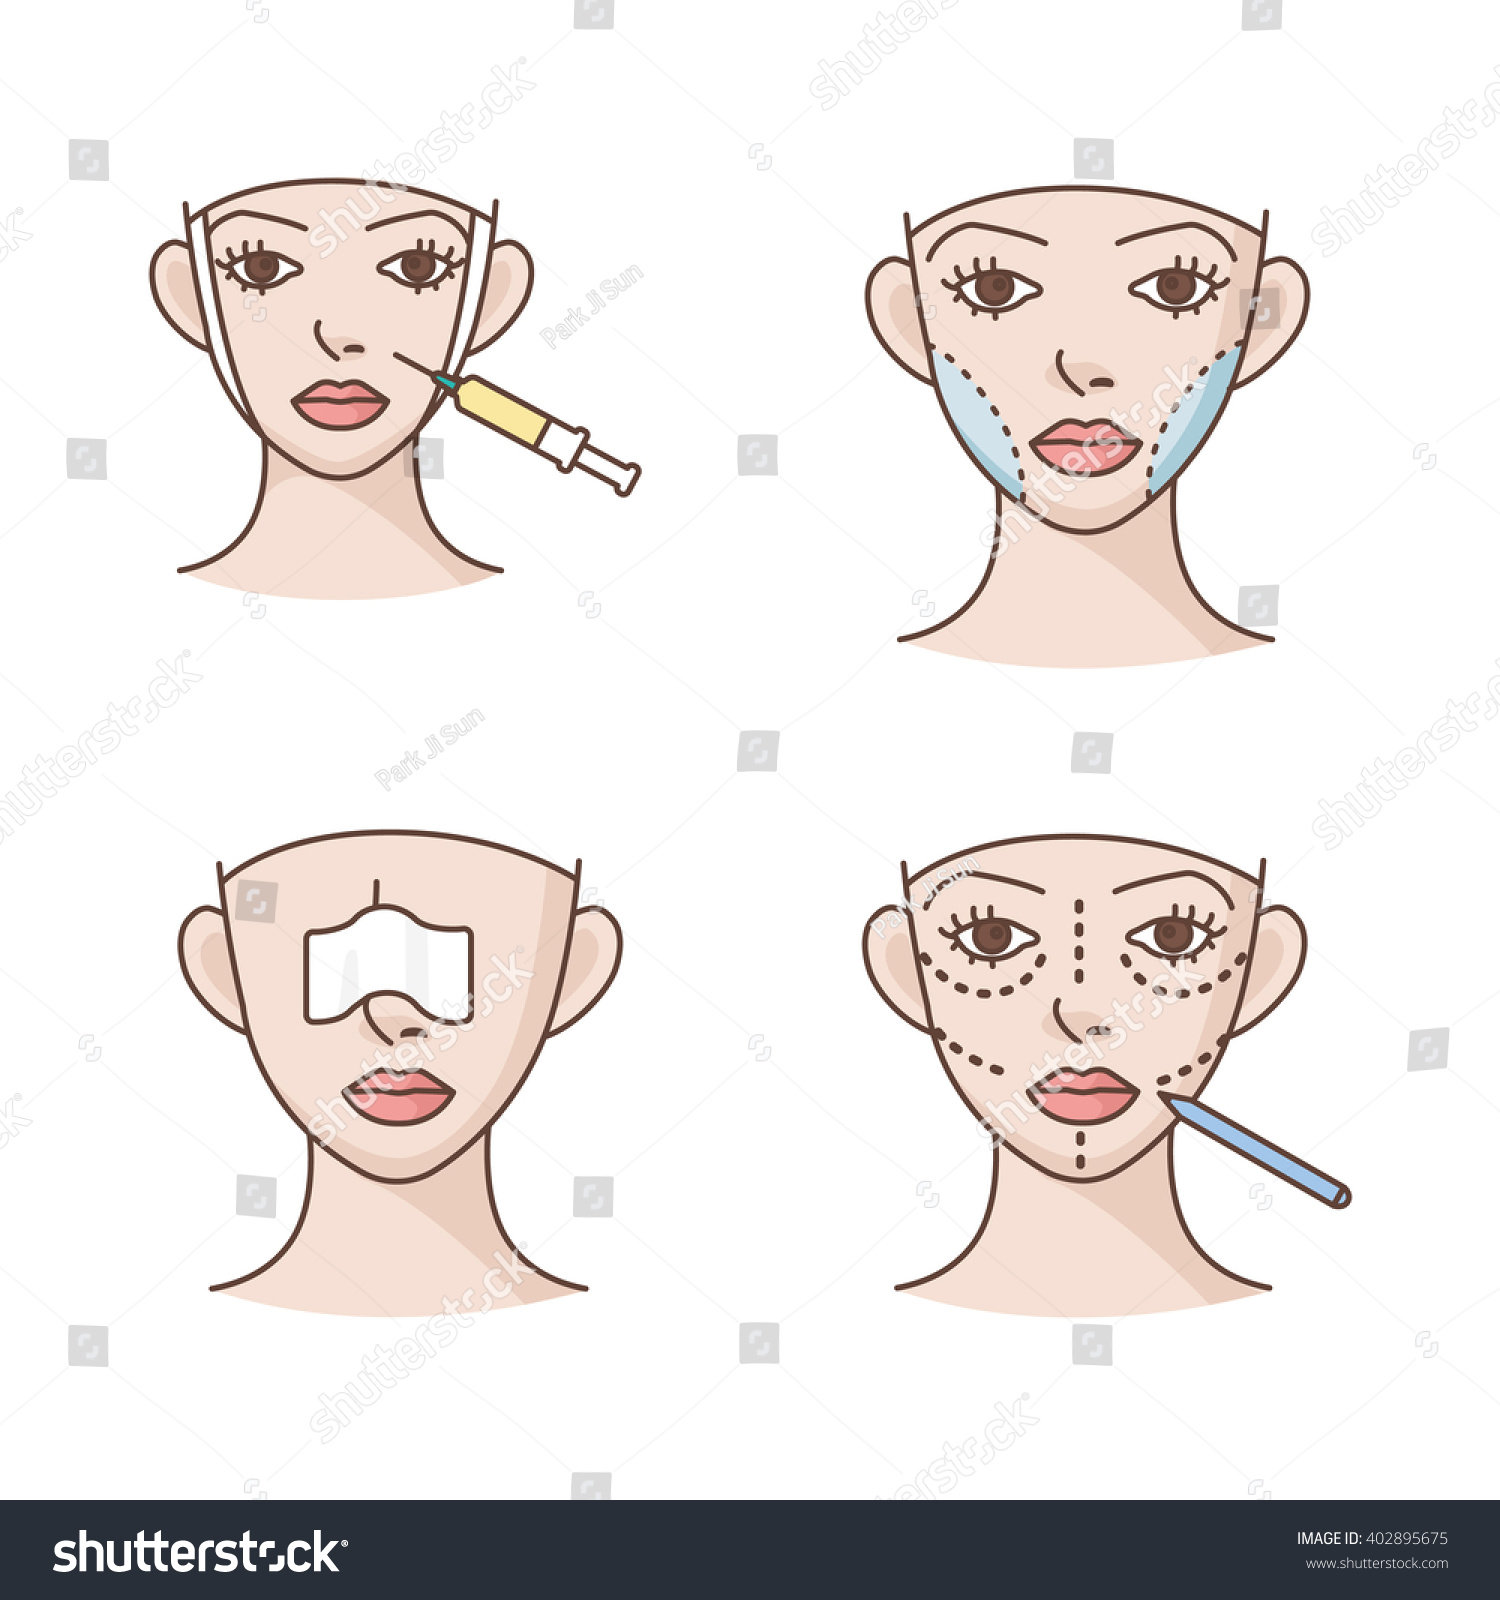 Plastic Surgery Vector Icons Royalty Free Stock Vector 402895675